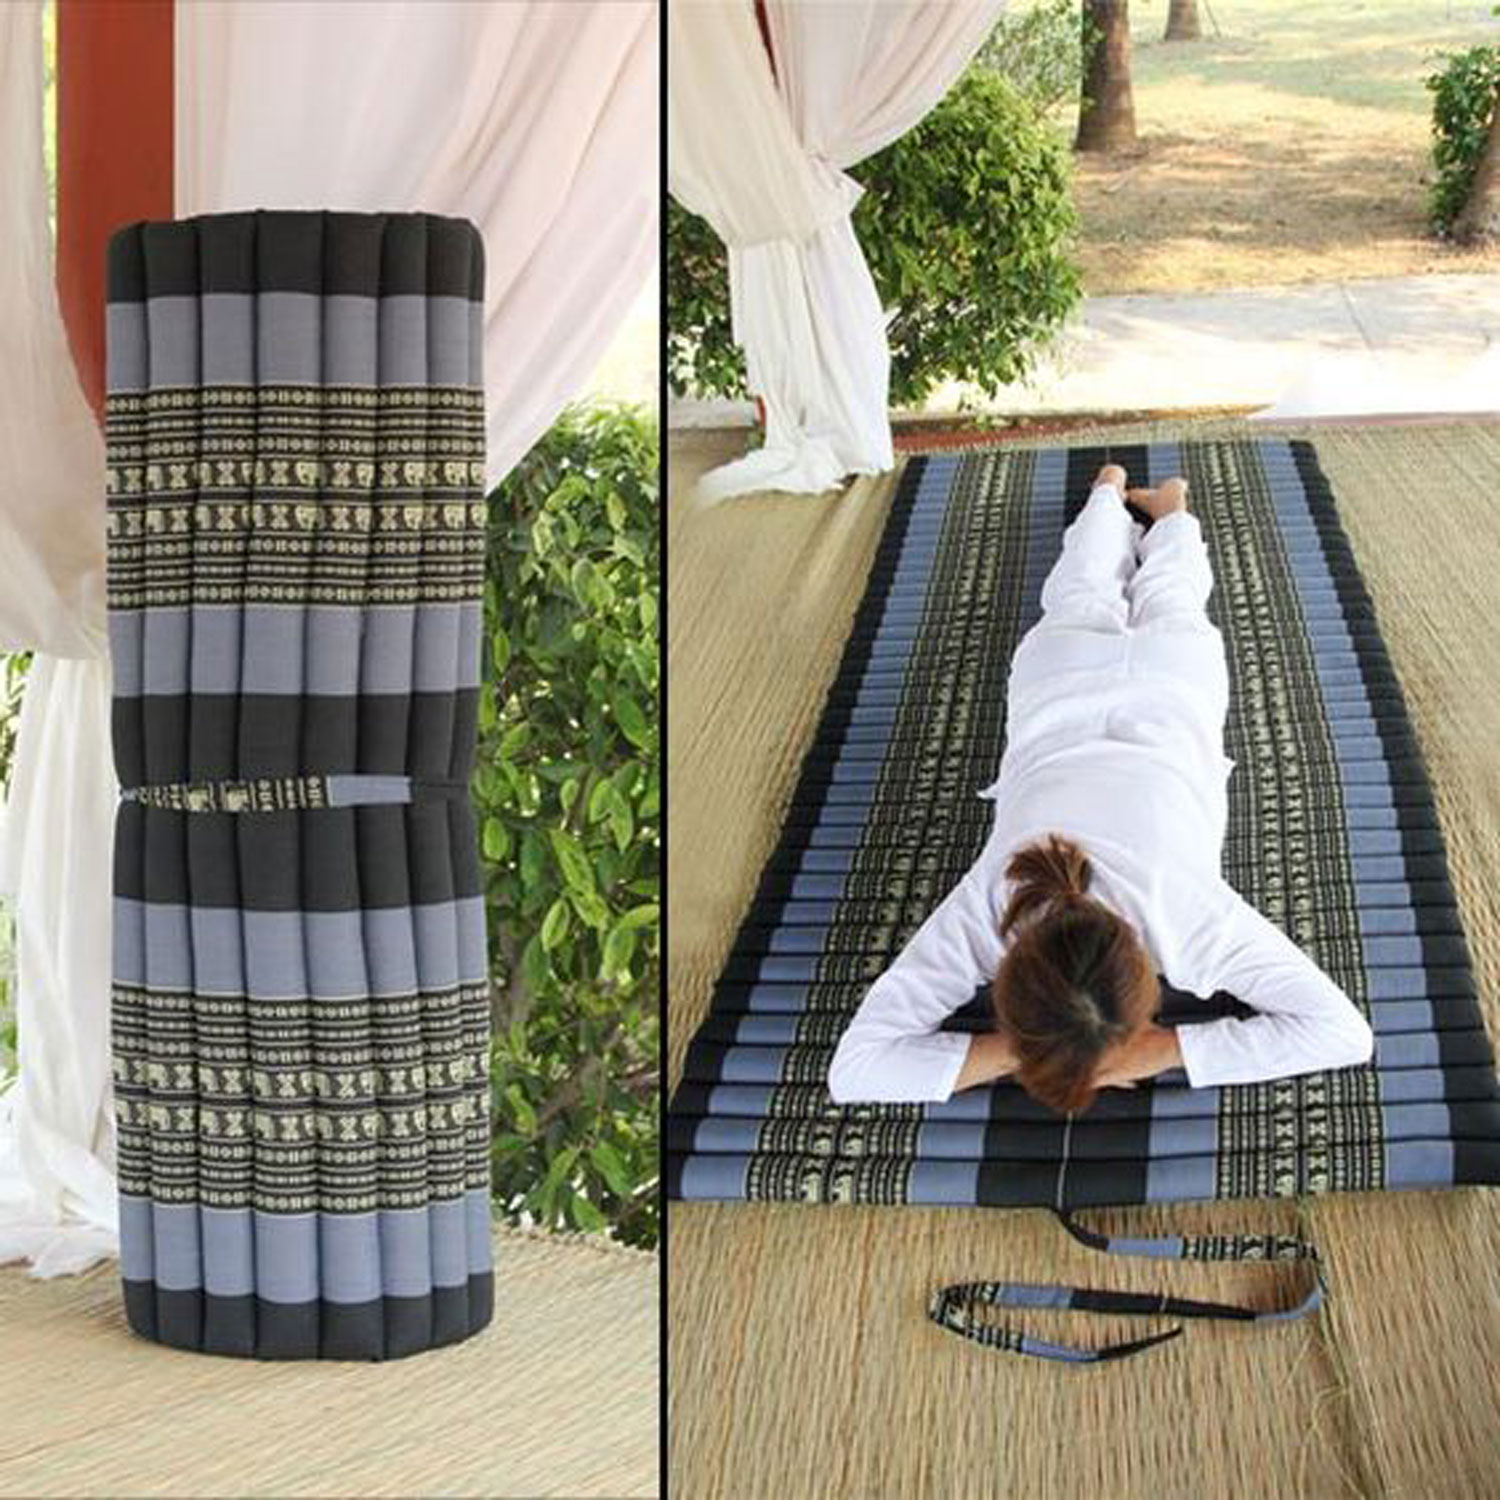 Portable Mattress Yoga Dance Floor Meditation Mat Daybed Fold Out